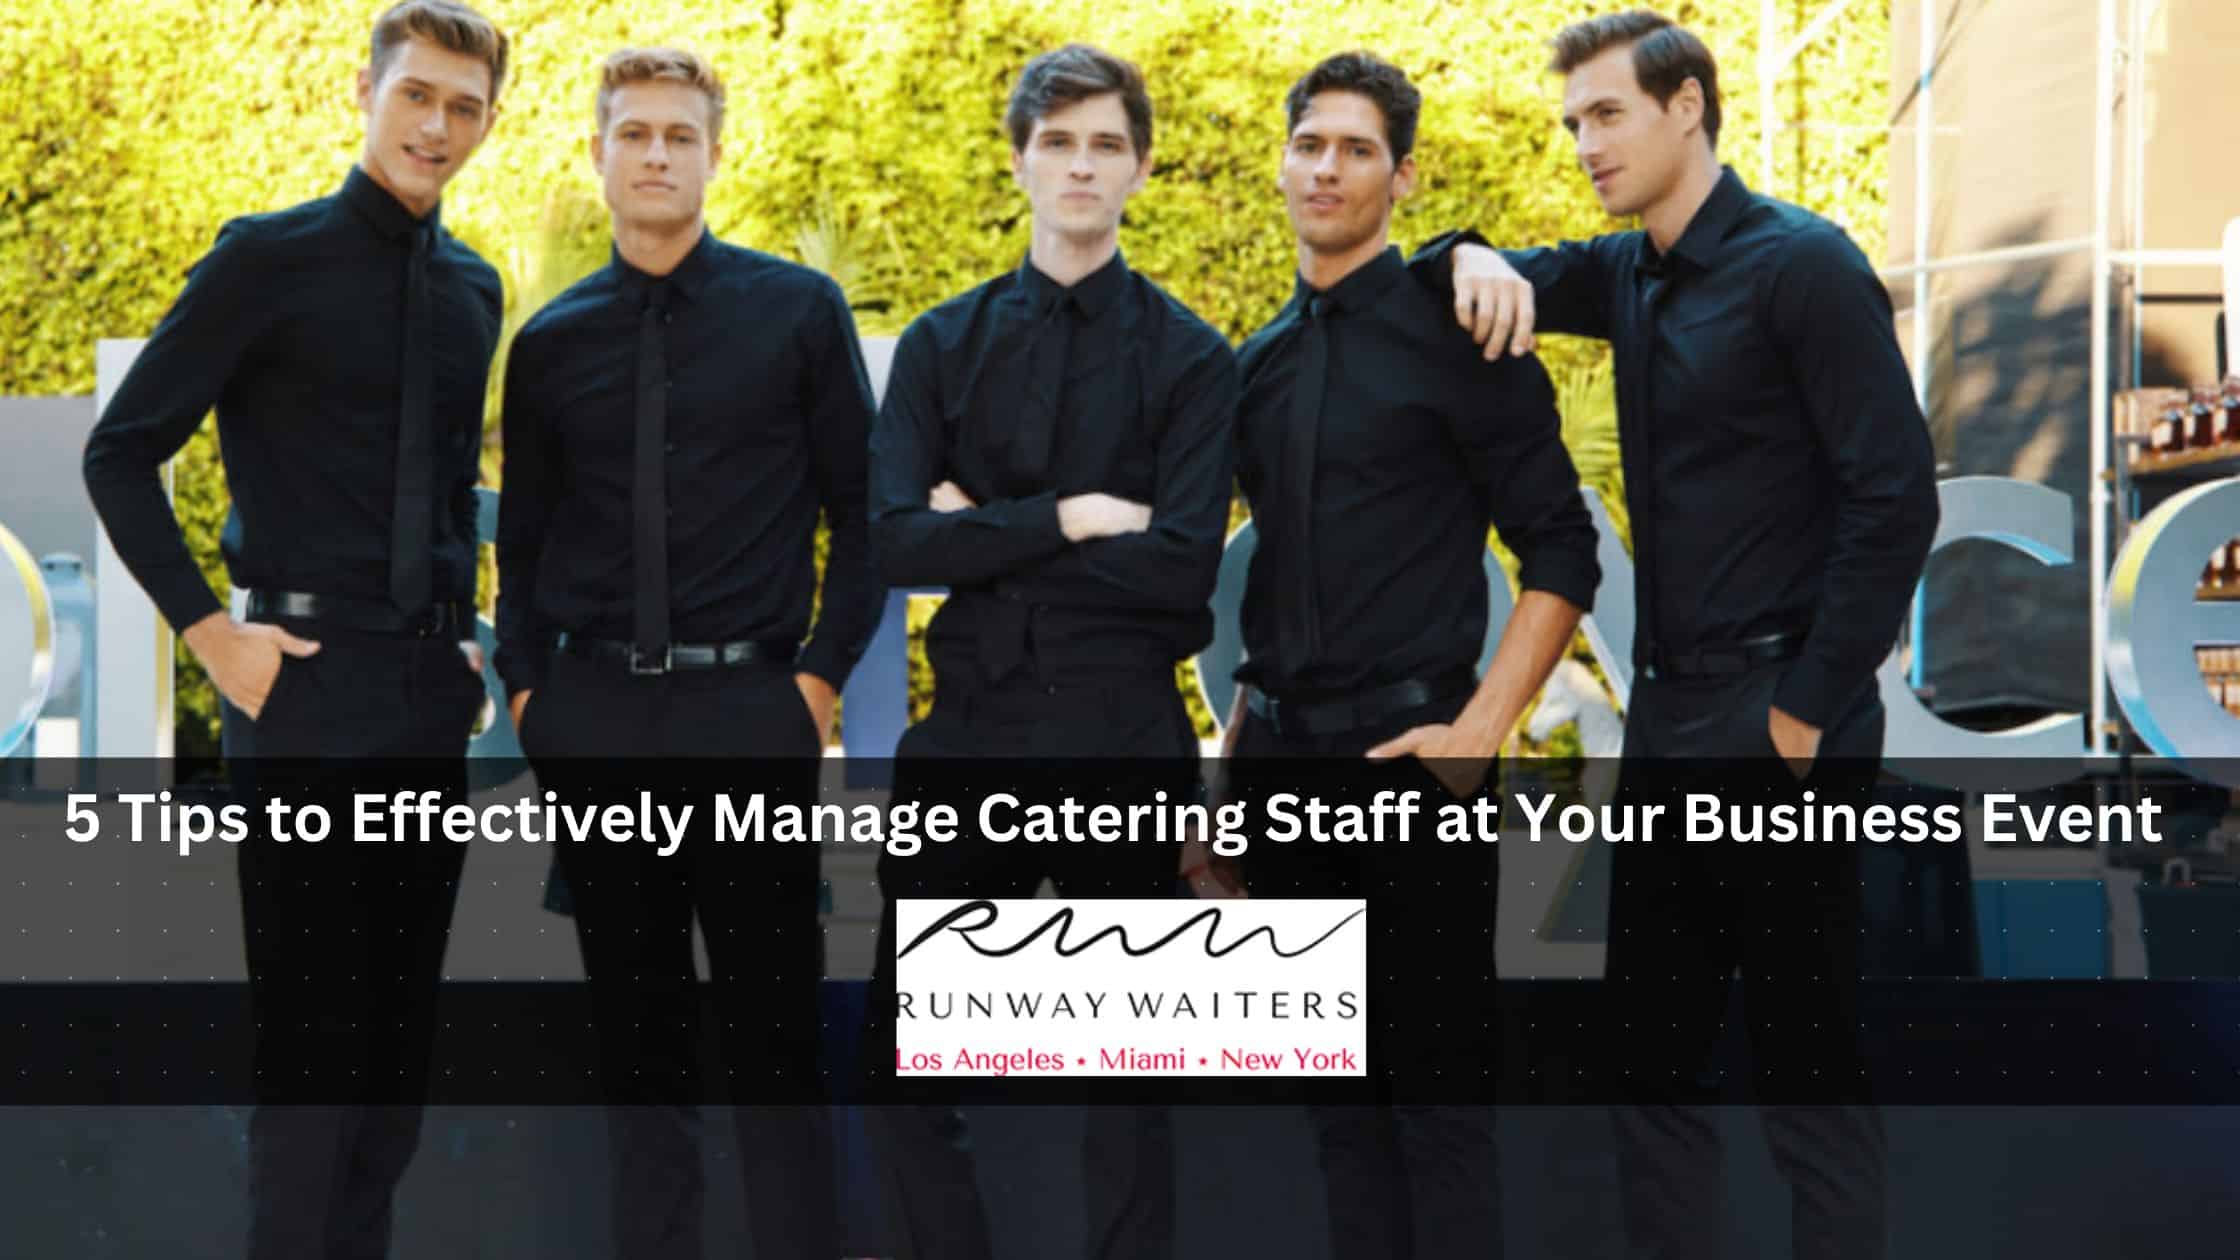 Catering Staff at Your Business Event